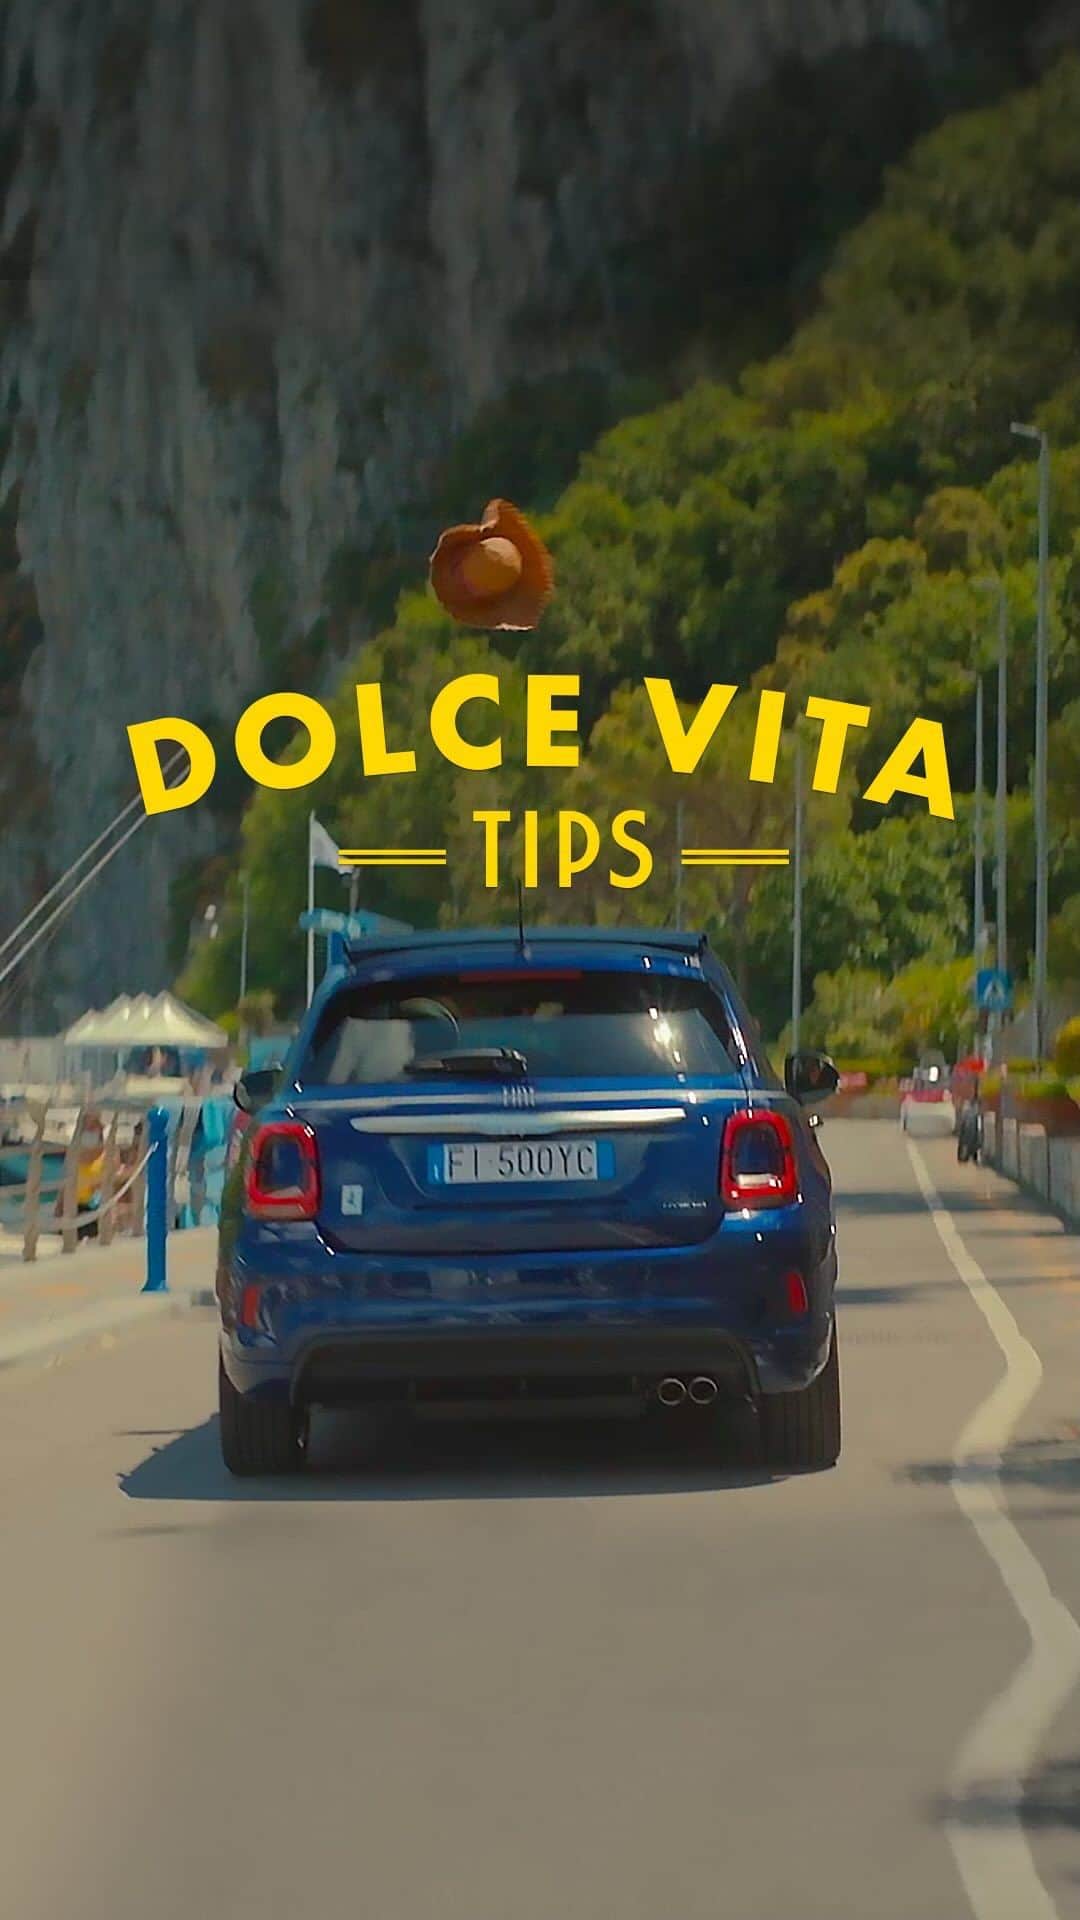 Fiat のインスタグラム：「Remember, it’s the simple pleasures that make life worth living. Winter is over: embrace the Dolce Vita way!」